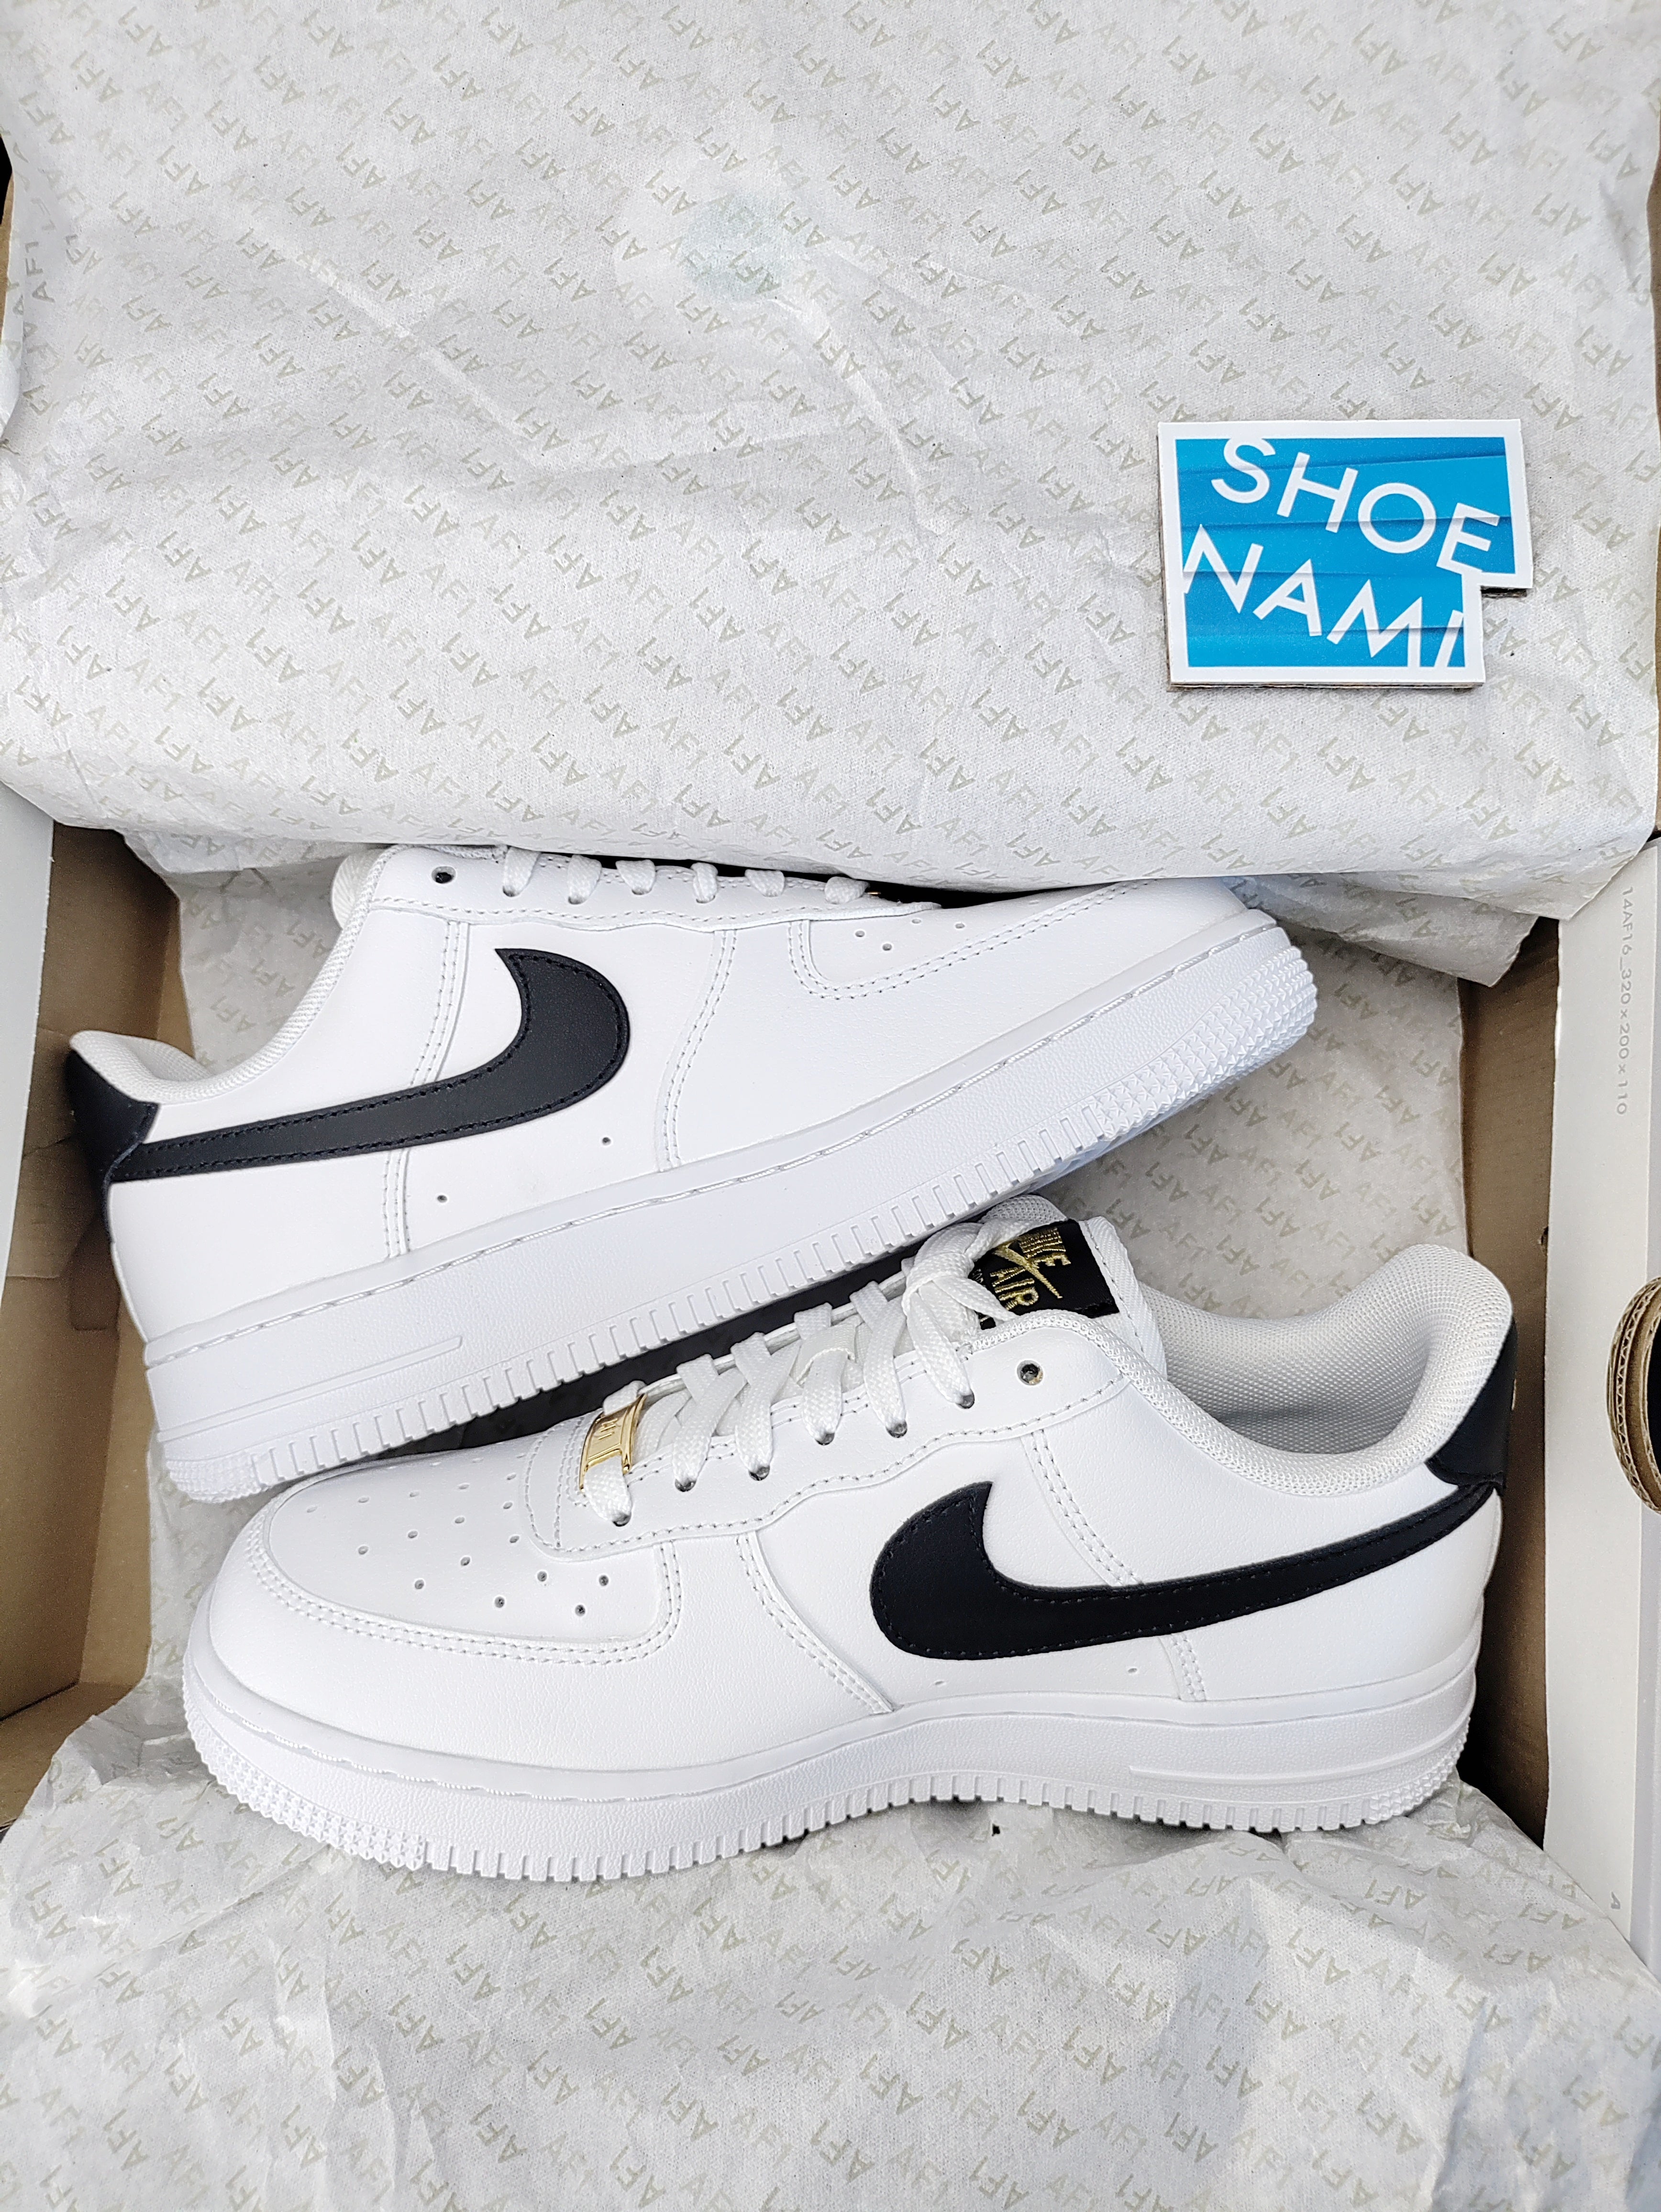 air force 1 07 black and white